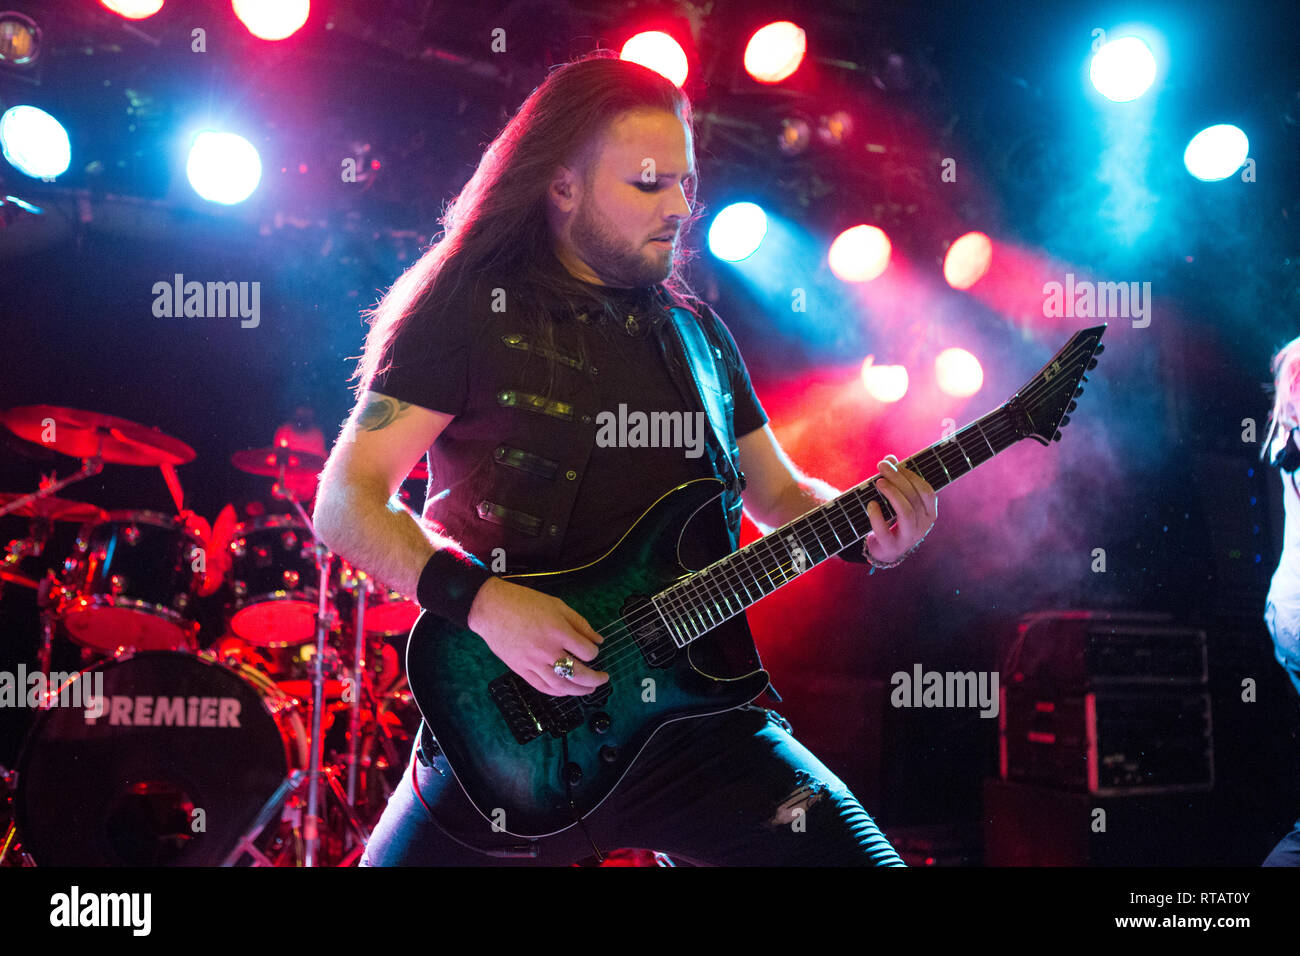 Norway, Oslo - February 26, 2019. The Norwegian gothic metal band Sirenia performs a live concert at John Dee in Oslo. (Photo credit: Gonzales Photo - Per-Otto Oppi). Stock Photo